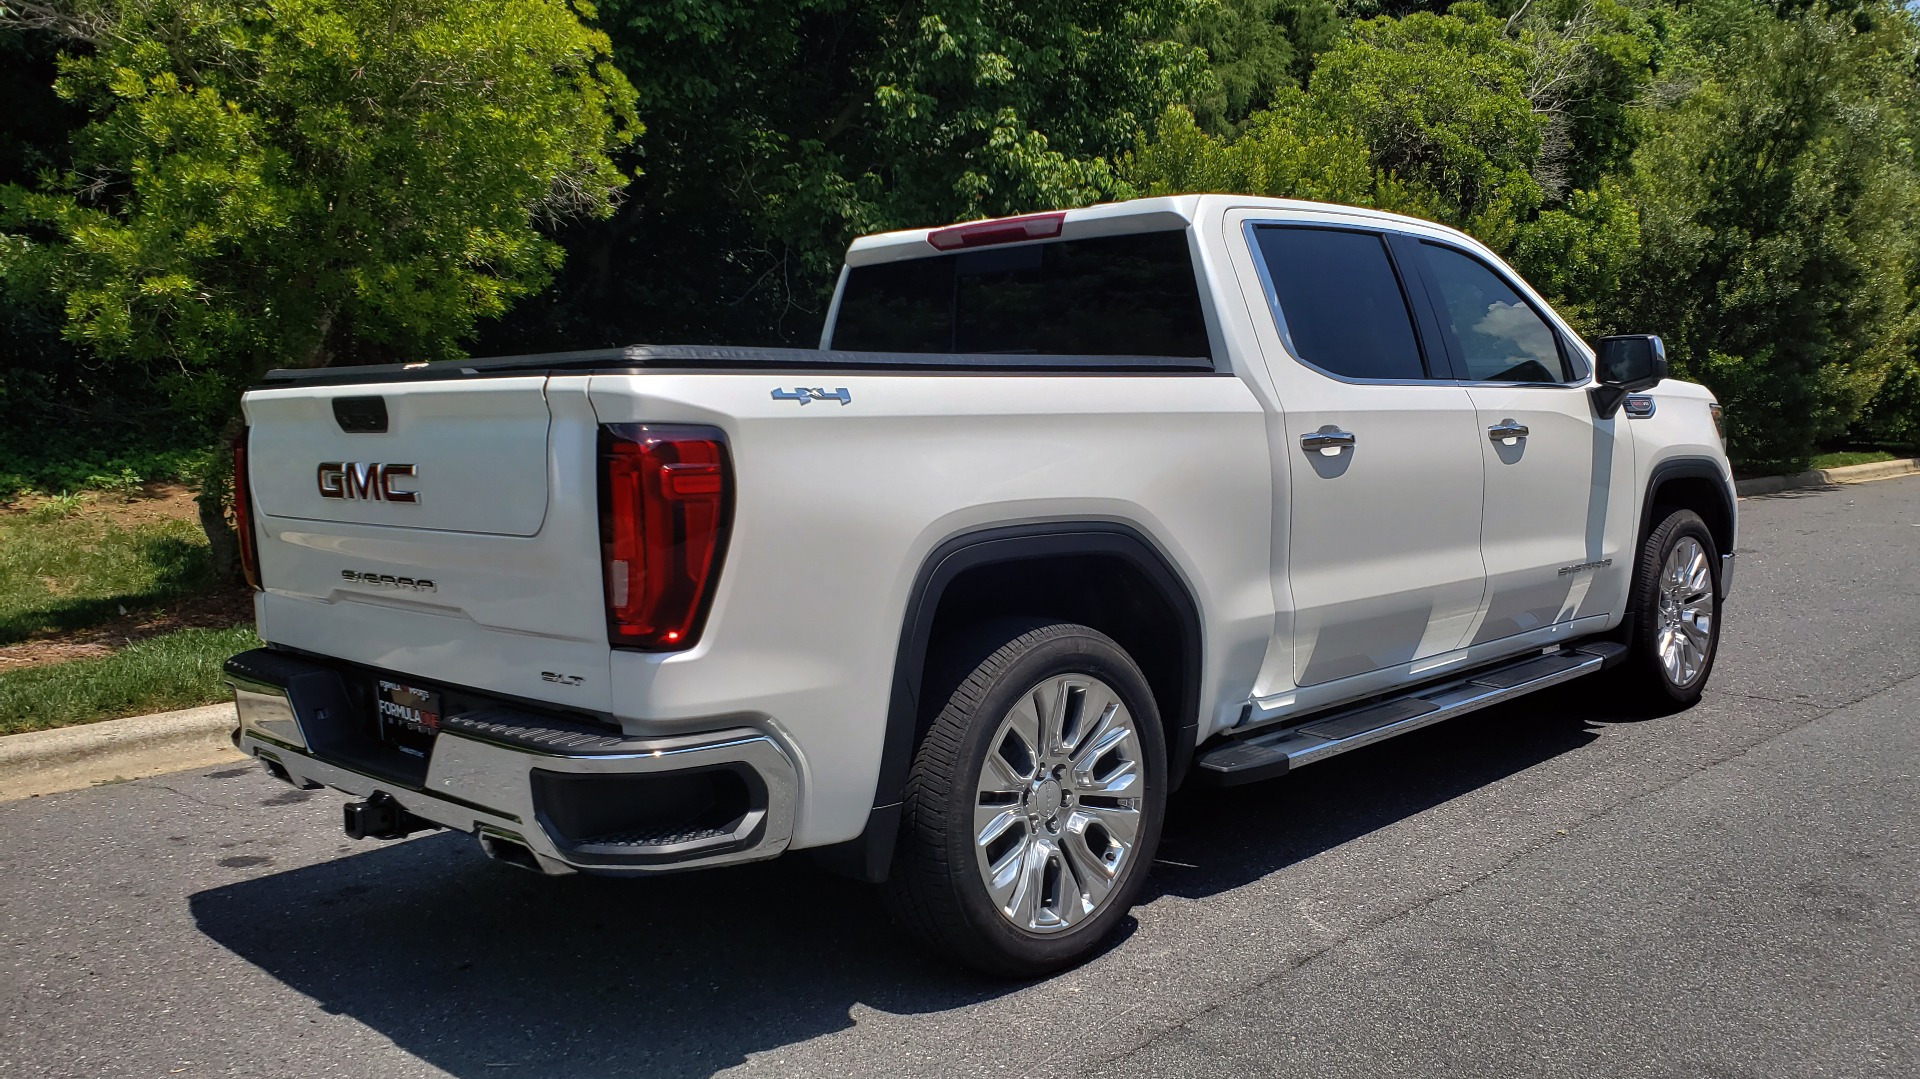 Used 2019 GMC SIERRA 1500 SLT 4WD CREWCAB / PREMIUM / 6.2L V8 / NAV / SUNROOF / VENT SEATS for sale Sold at Formula Imports in Charlotte NC 28227 6